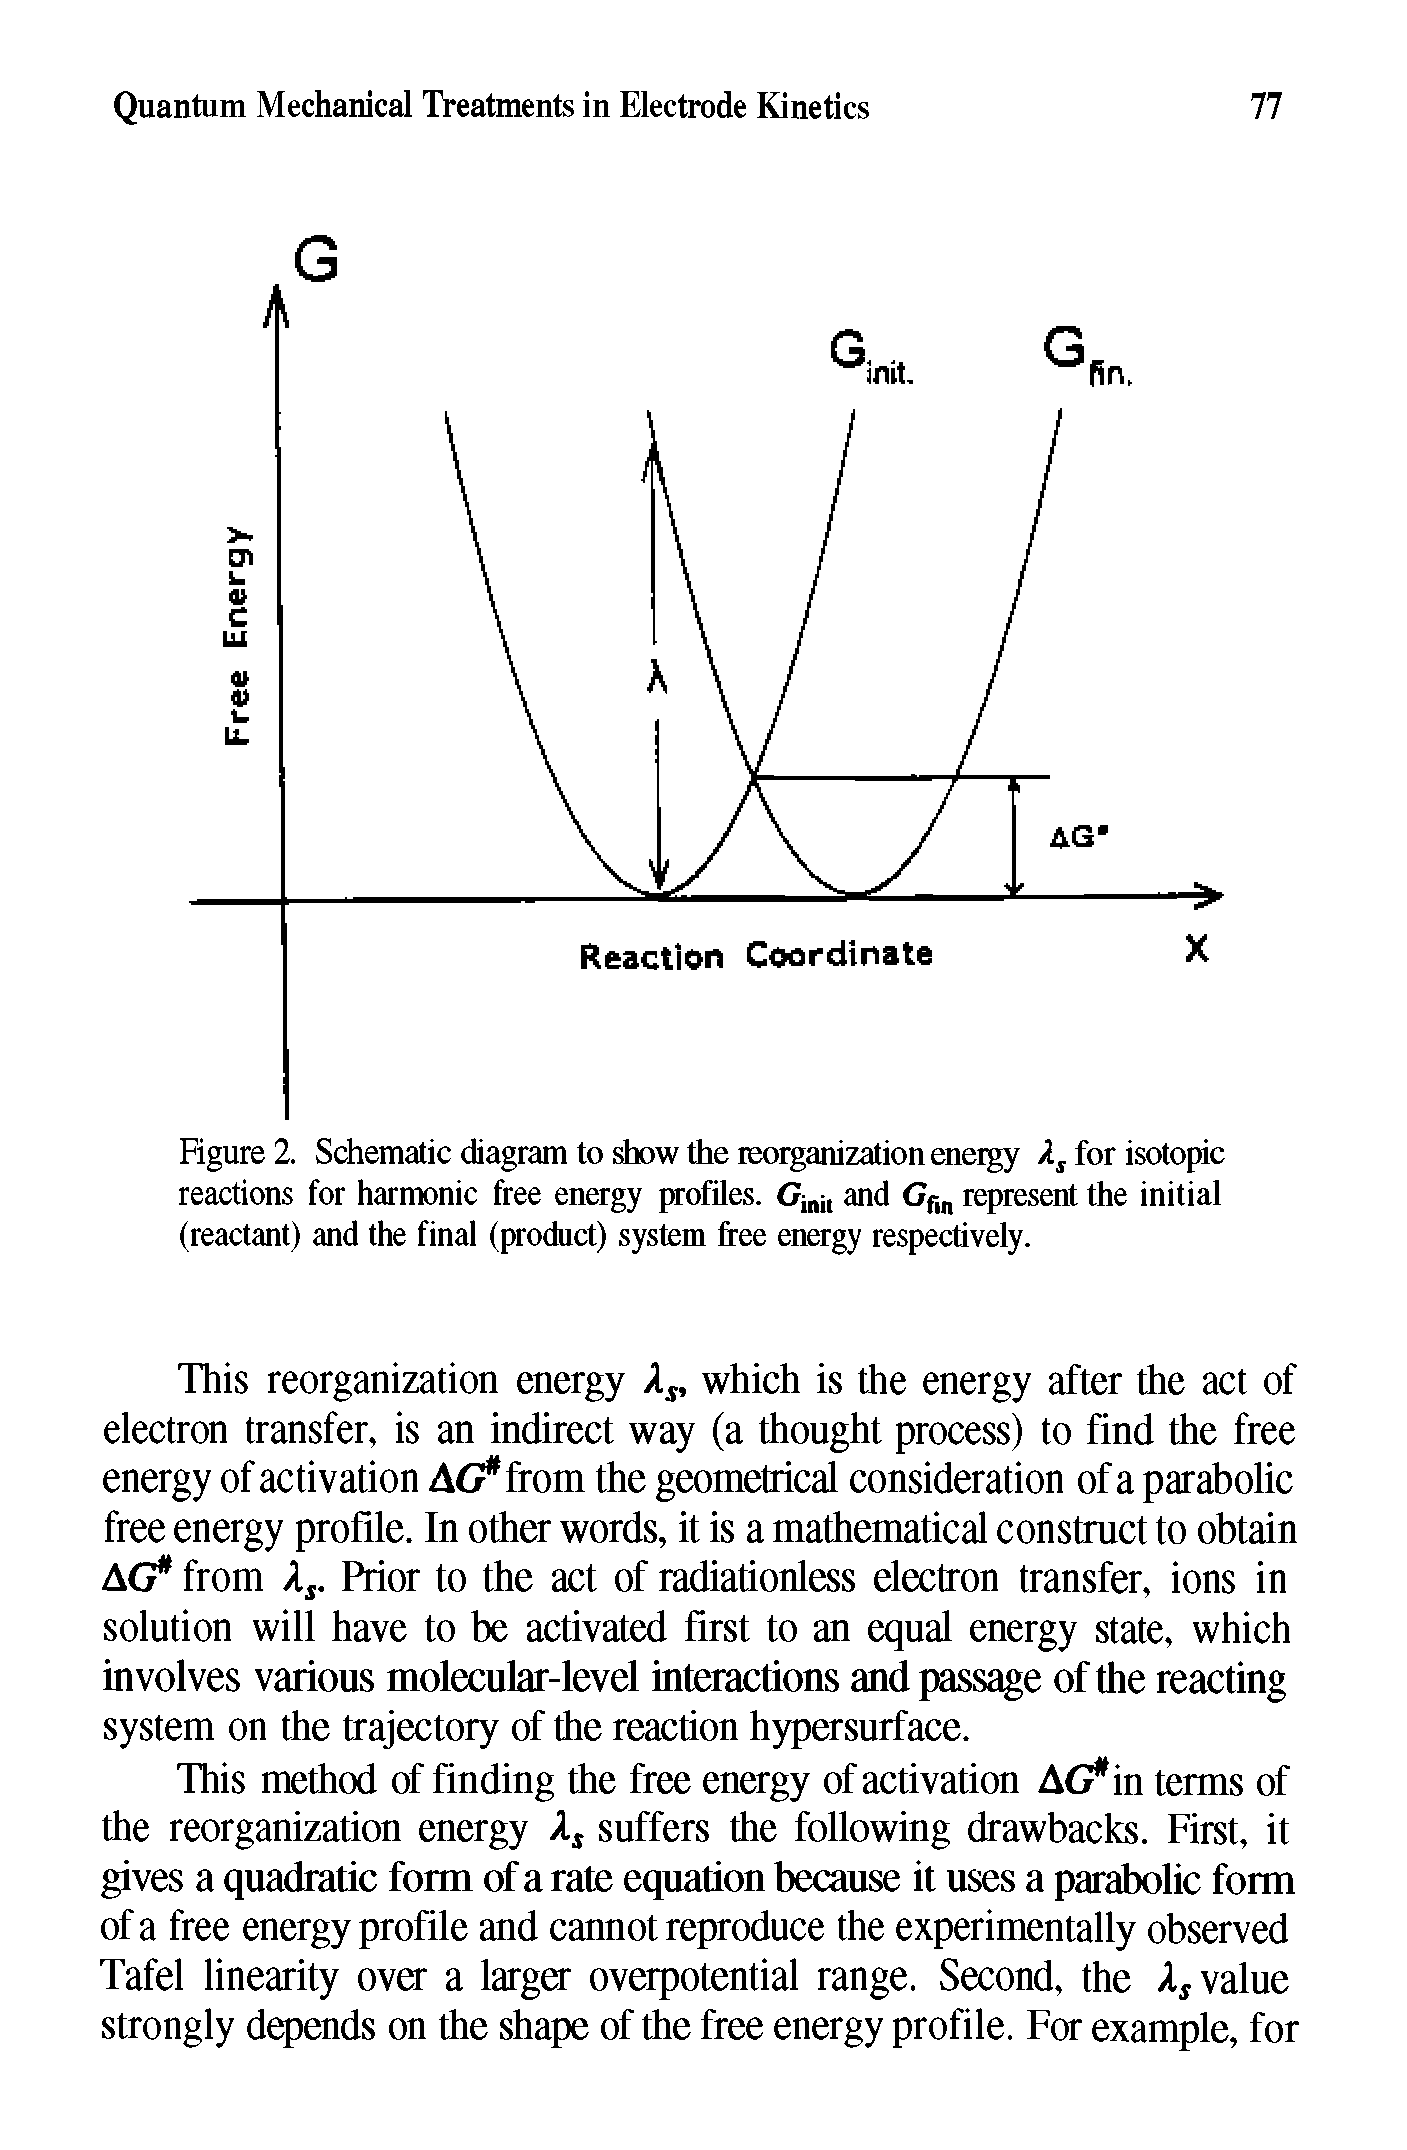 Figure Schematic diagram to show the reorganization energy for isotopic reactions for harmonic free energy profiles. Ci i, and Gf, represent the initial (reactant) and the final (product) system free energy respectively.